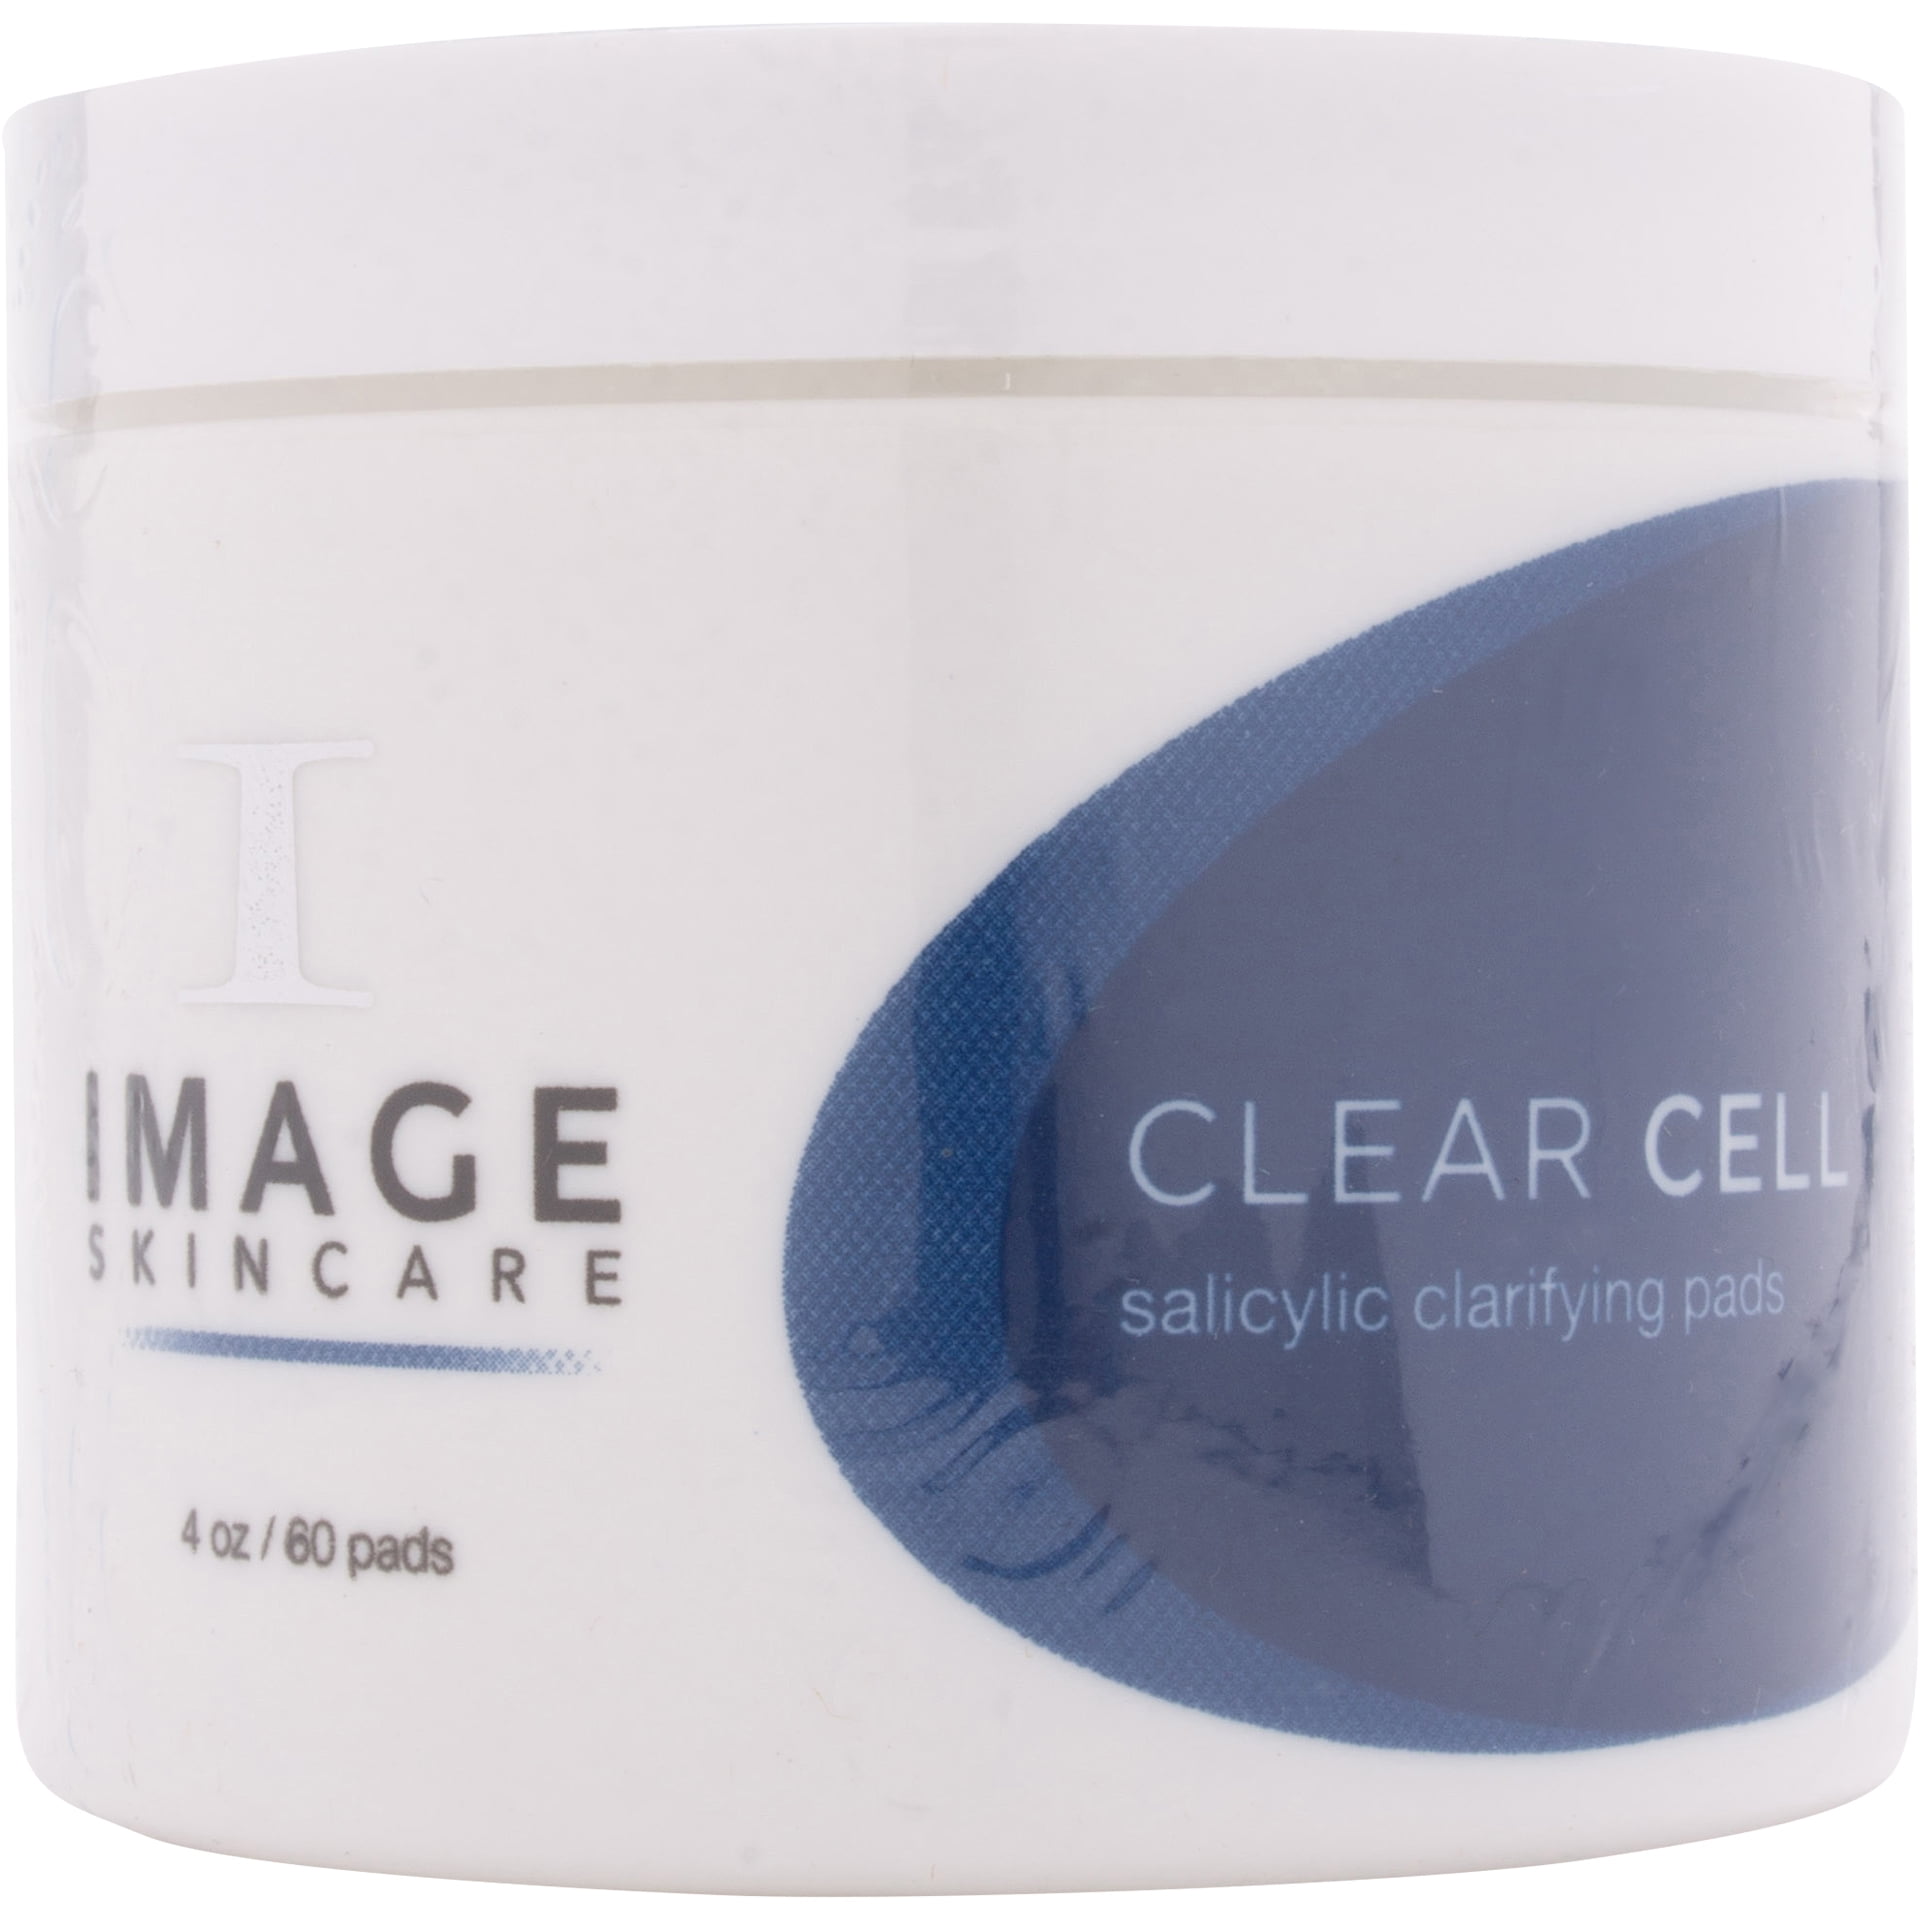 Image Skincare Clear Cell Salicylic Clarifying Pads 60ct - Walmart.com